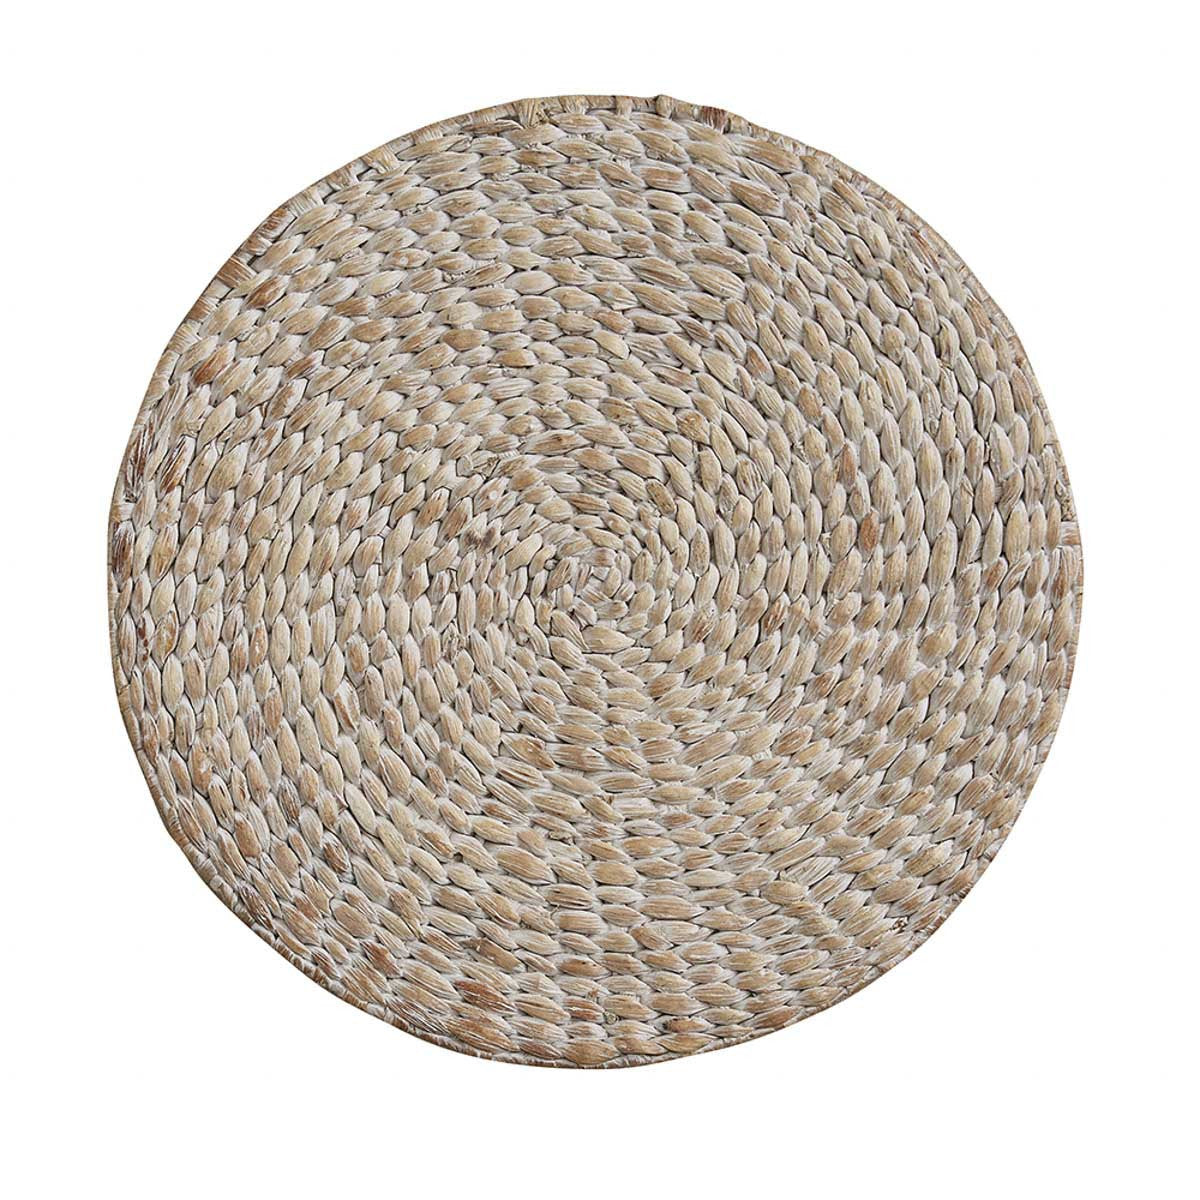 Hyacinth Round Braided Placemat -White Set Of 6 Park Designs